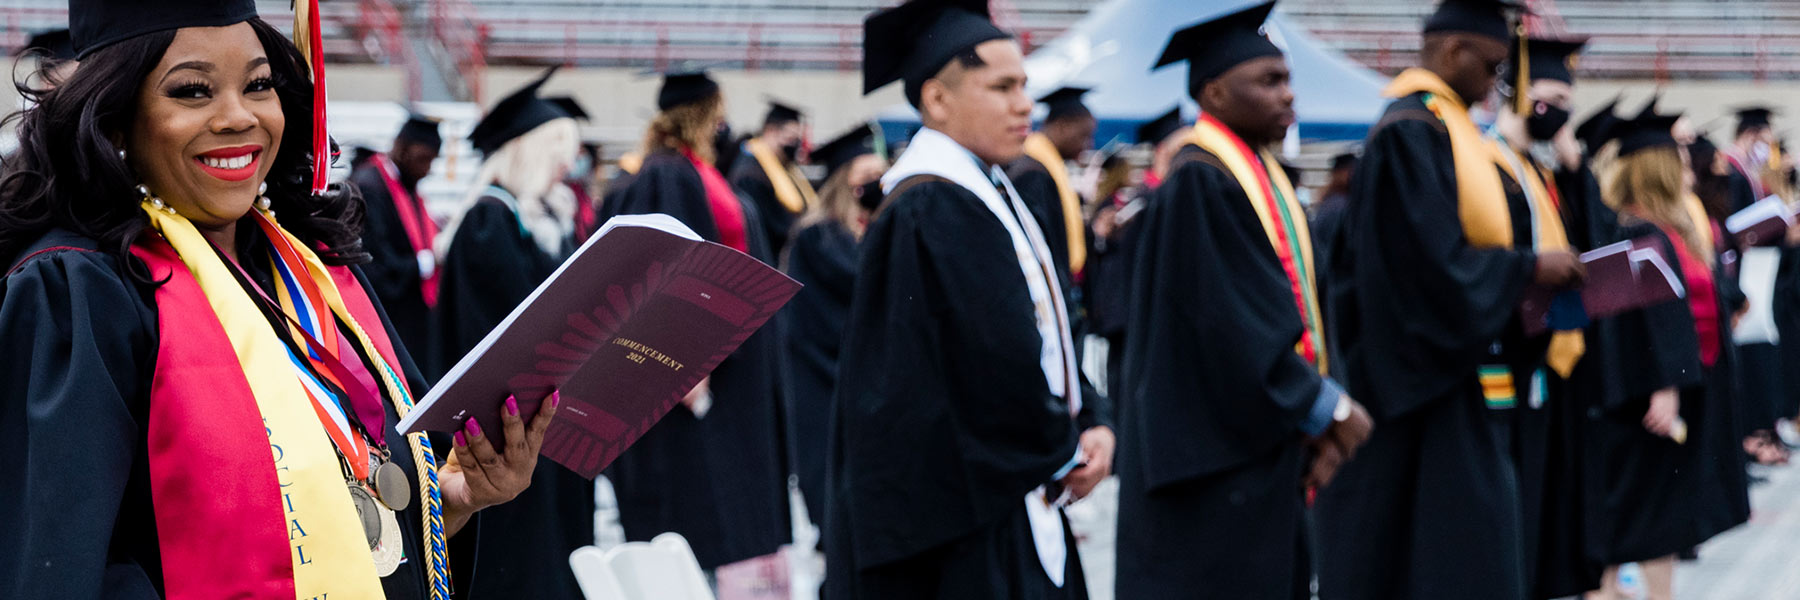 A graduate stands during the Commencement ceremony holding the official program